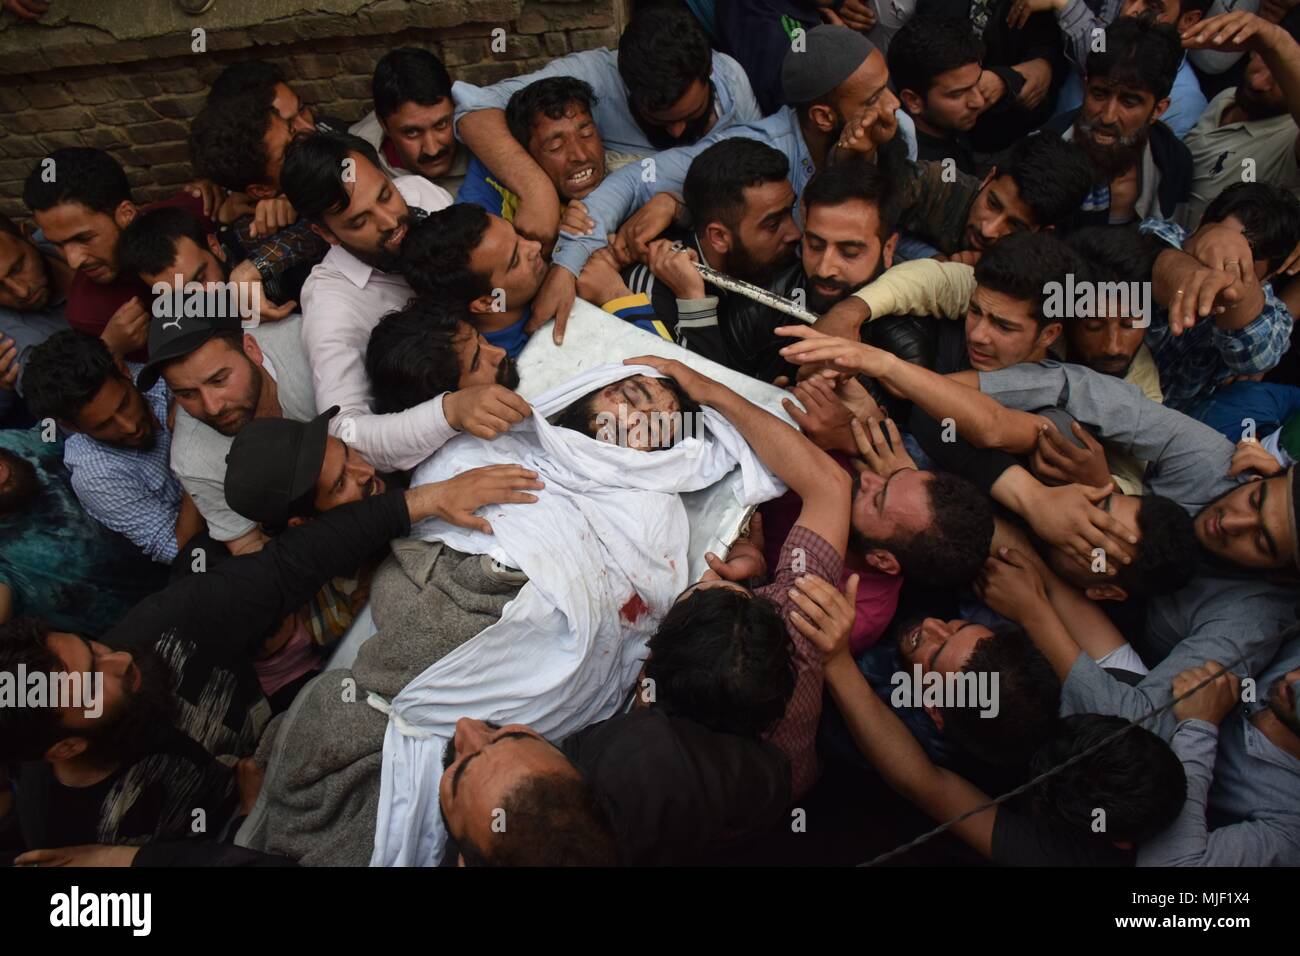 Srinagar, Jammu & Kashmir, India, May 5, 2018.  (EDITORS NOTE: Image depicts death.).People carrying body of militant Fayaz Ahmed Hamal at his residence Khankah Area of Srinagar Summer Capital Of Indian Kashmir on Saturday for burial.Multiple Funeral processions held in srinagar summer capital of Indian Kashmir on Saturday of Fayaz Ahmed Hamal a LeT (Lashkar-e-Taiba) Militant and a Civilian Adil Ahmed Yatoo who were killed by armoured vehicle on Saturday during clashes near Encounter site. Credit: ZUMA Press, Inc./Alamy Live News Stock Photo